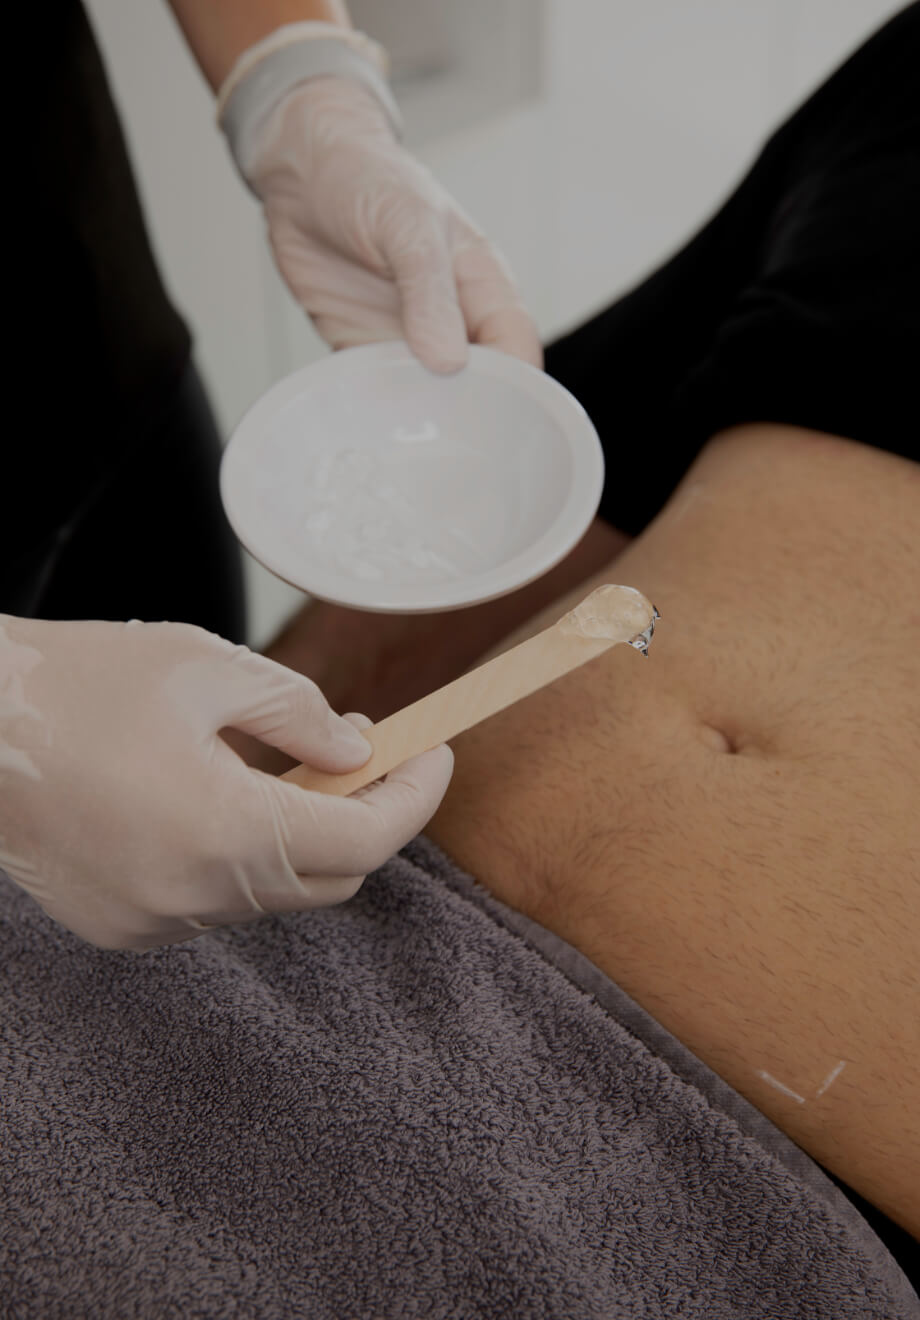 A medico-aesthetic technician from Clinique Chloé applying gel to a patient's abdomen with a wooden stick